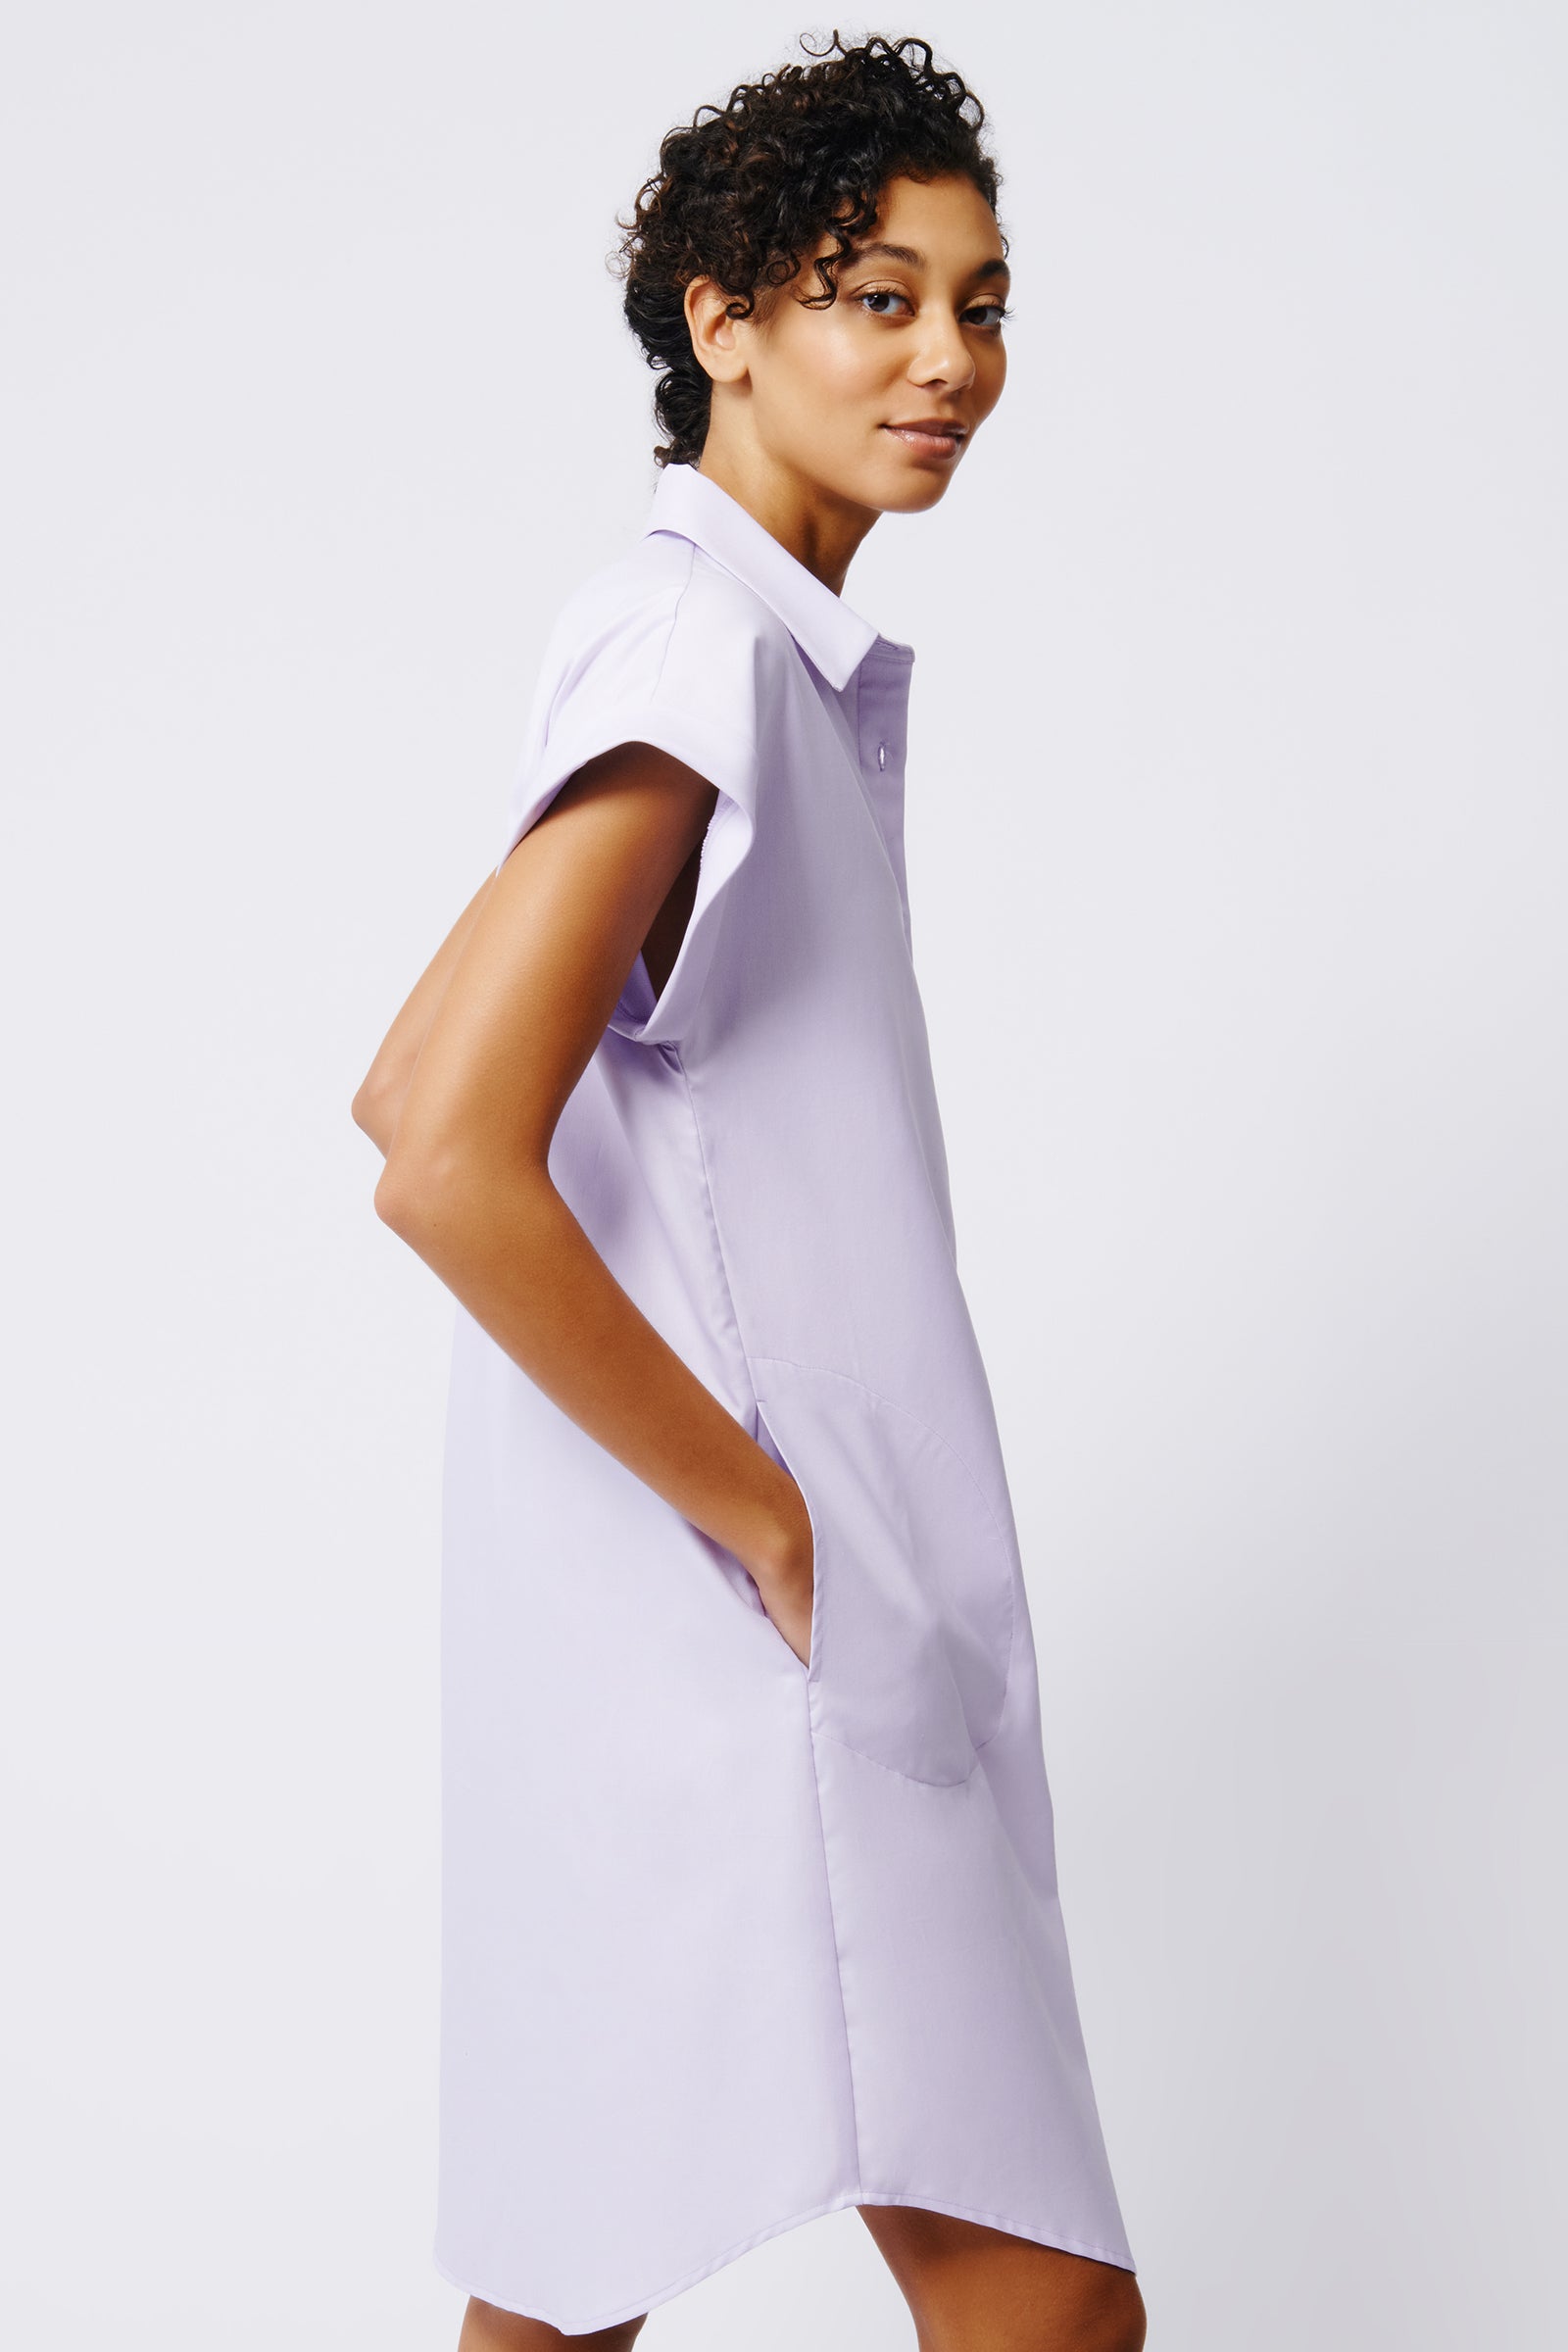 Kal Rieman Hedy Cuffed Cap Sleeve Shirt Dress in Lavender Pinpoint Oxford on Model Side View Crop